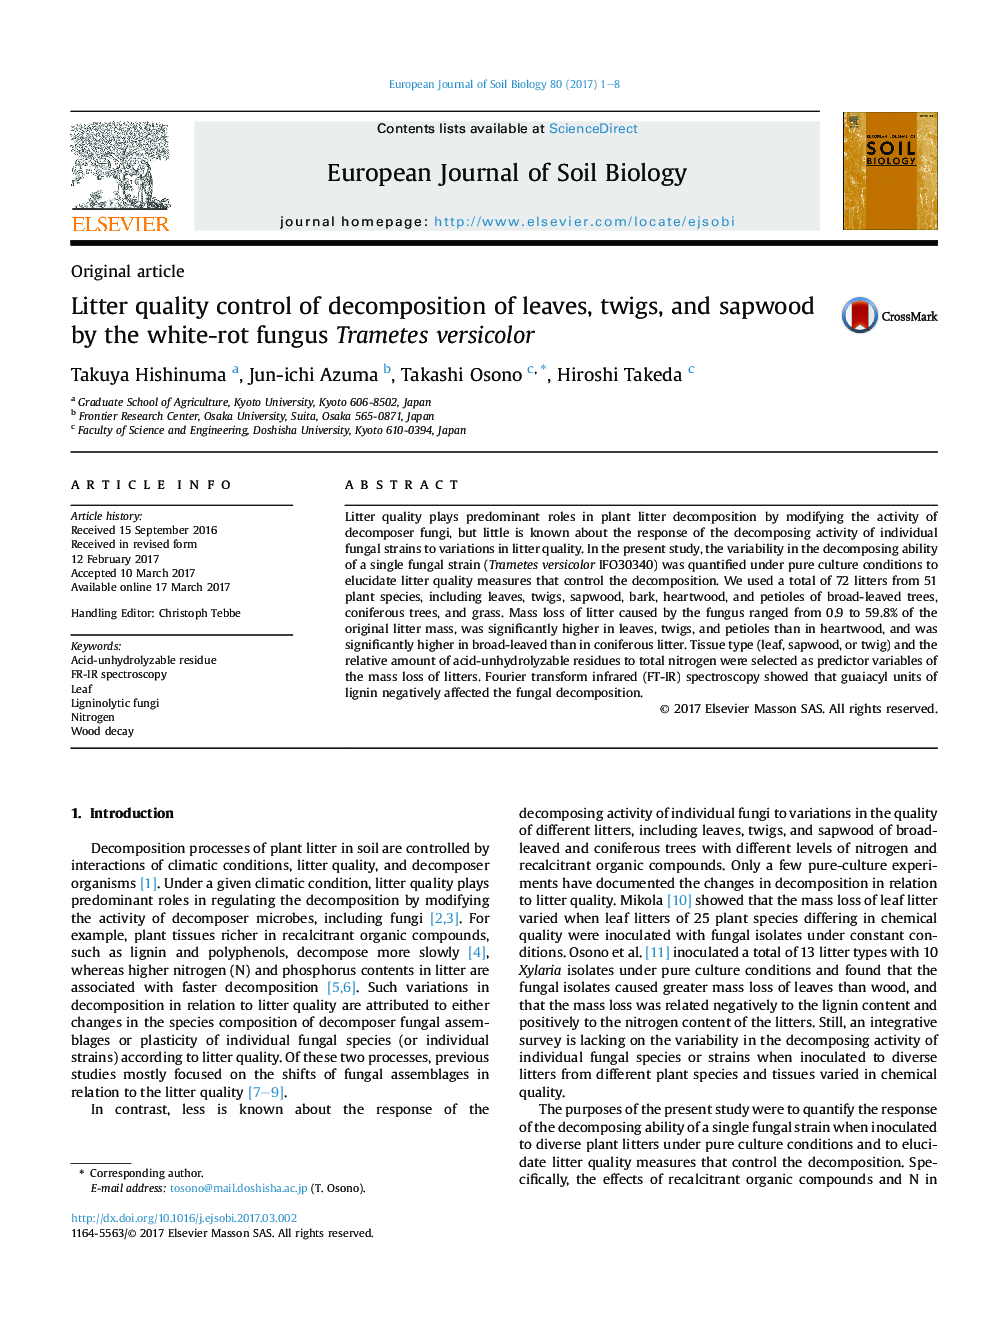 Original articleLitter quality control of decomposition of leaves, twigs, and sapwood by the white-rot fungus Trametes versicolor